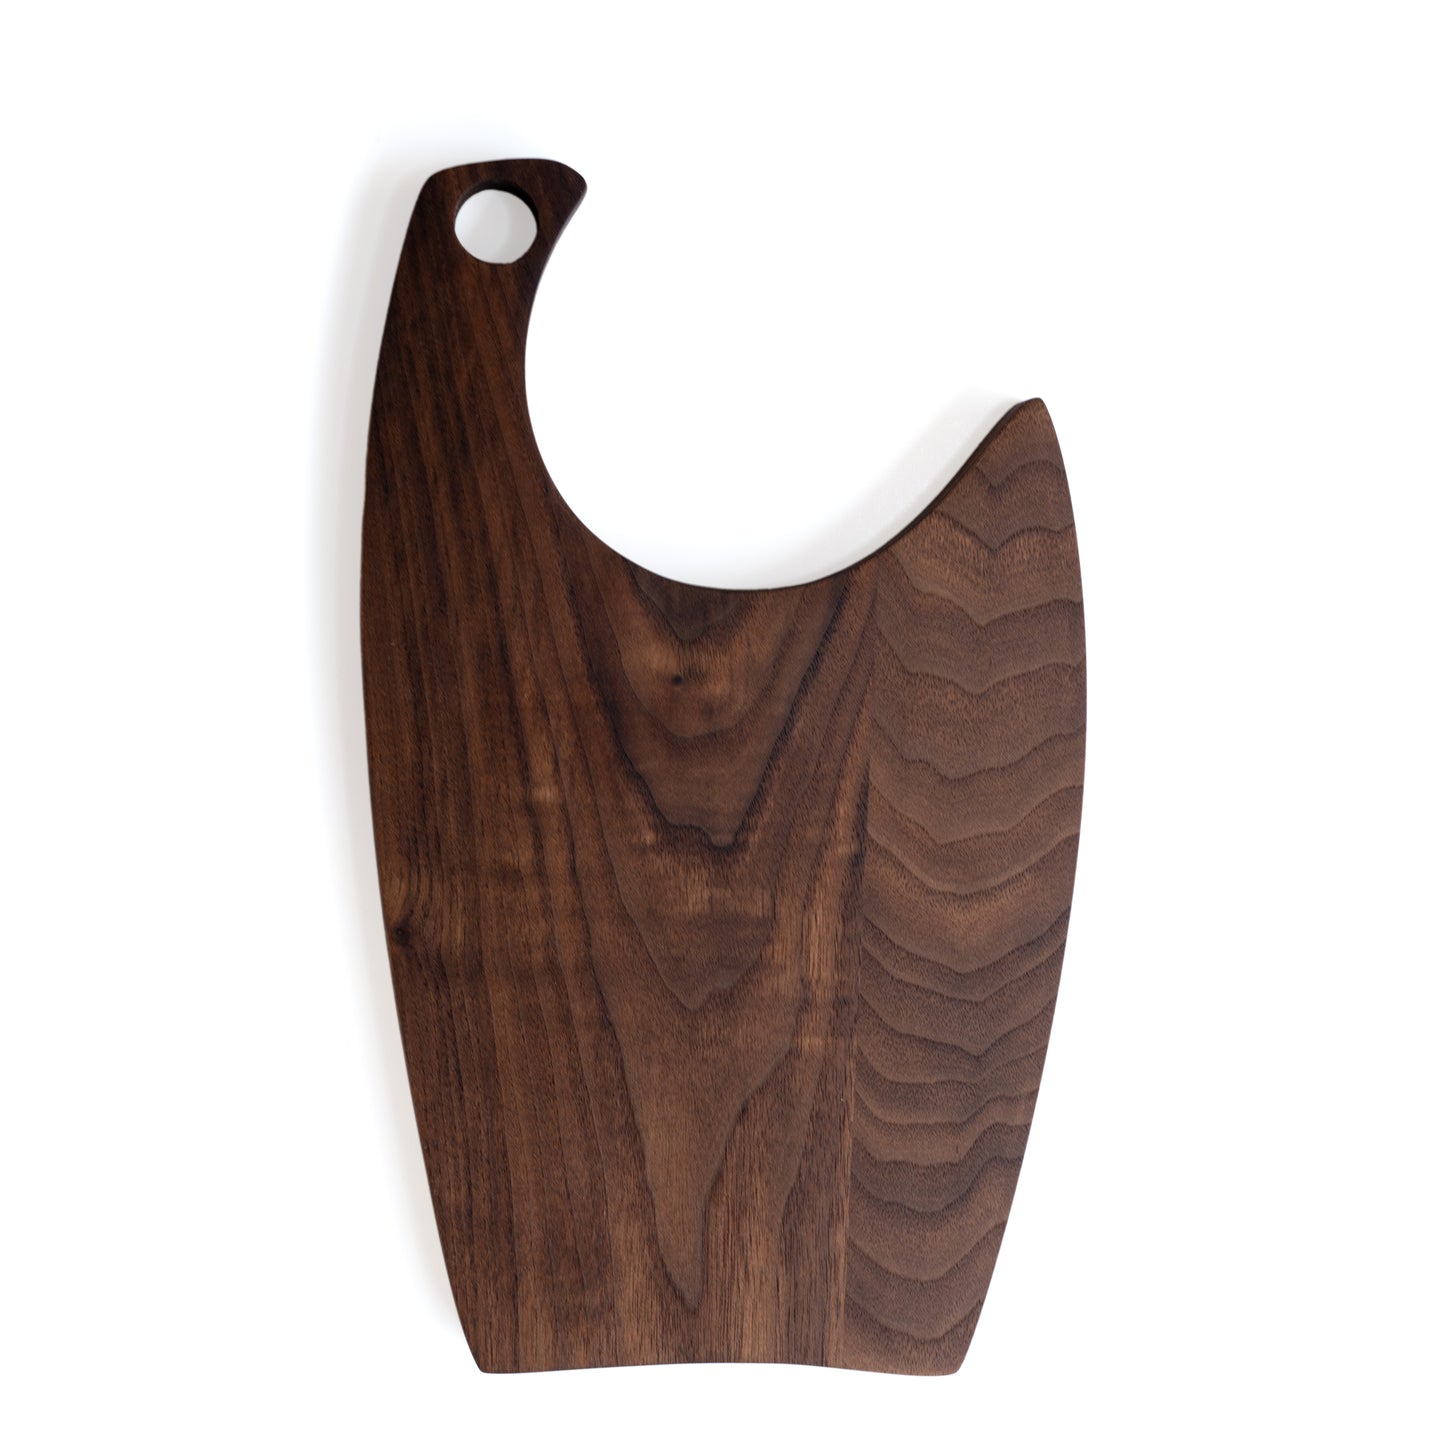 Handcrafted Wooden Charcuterie Board with Handle